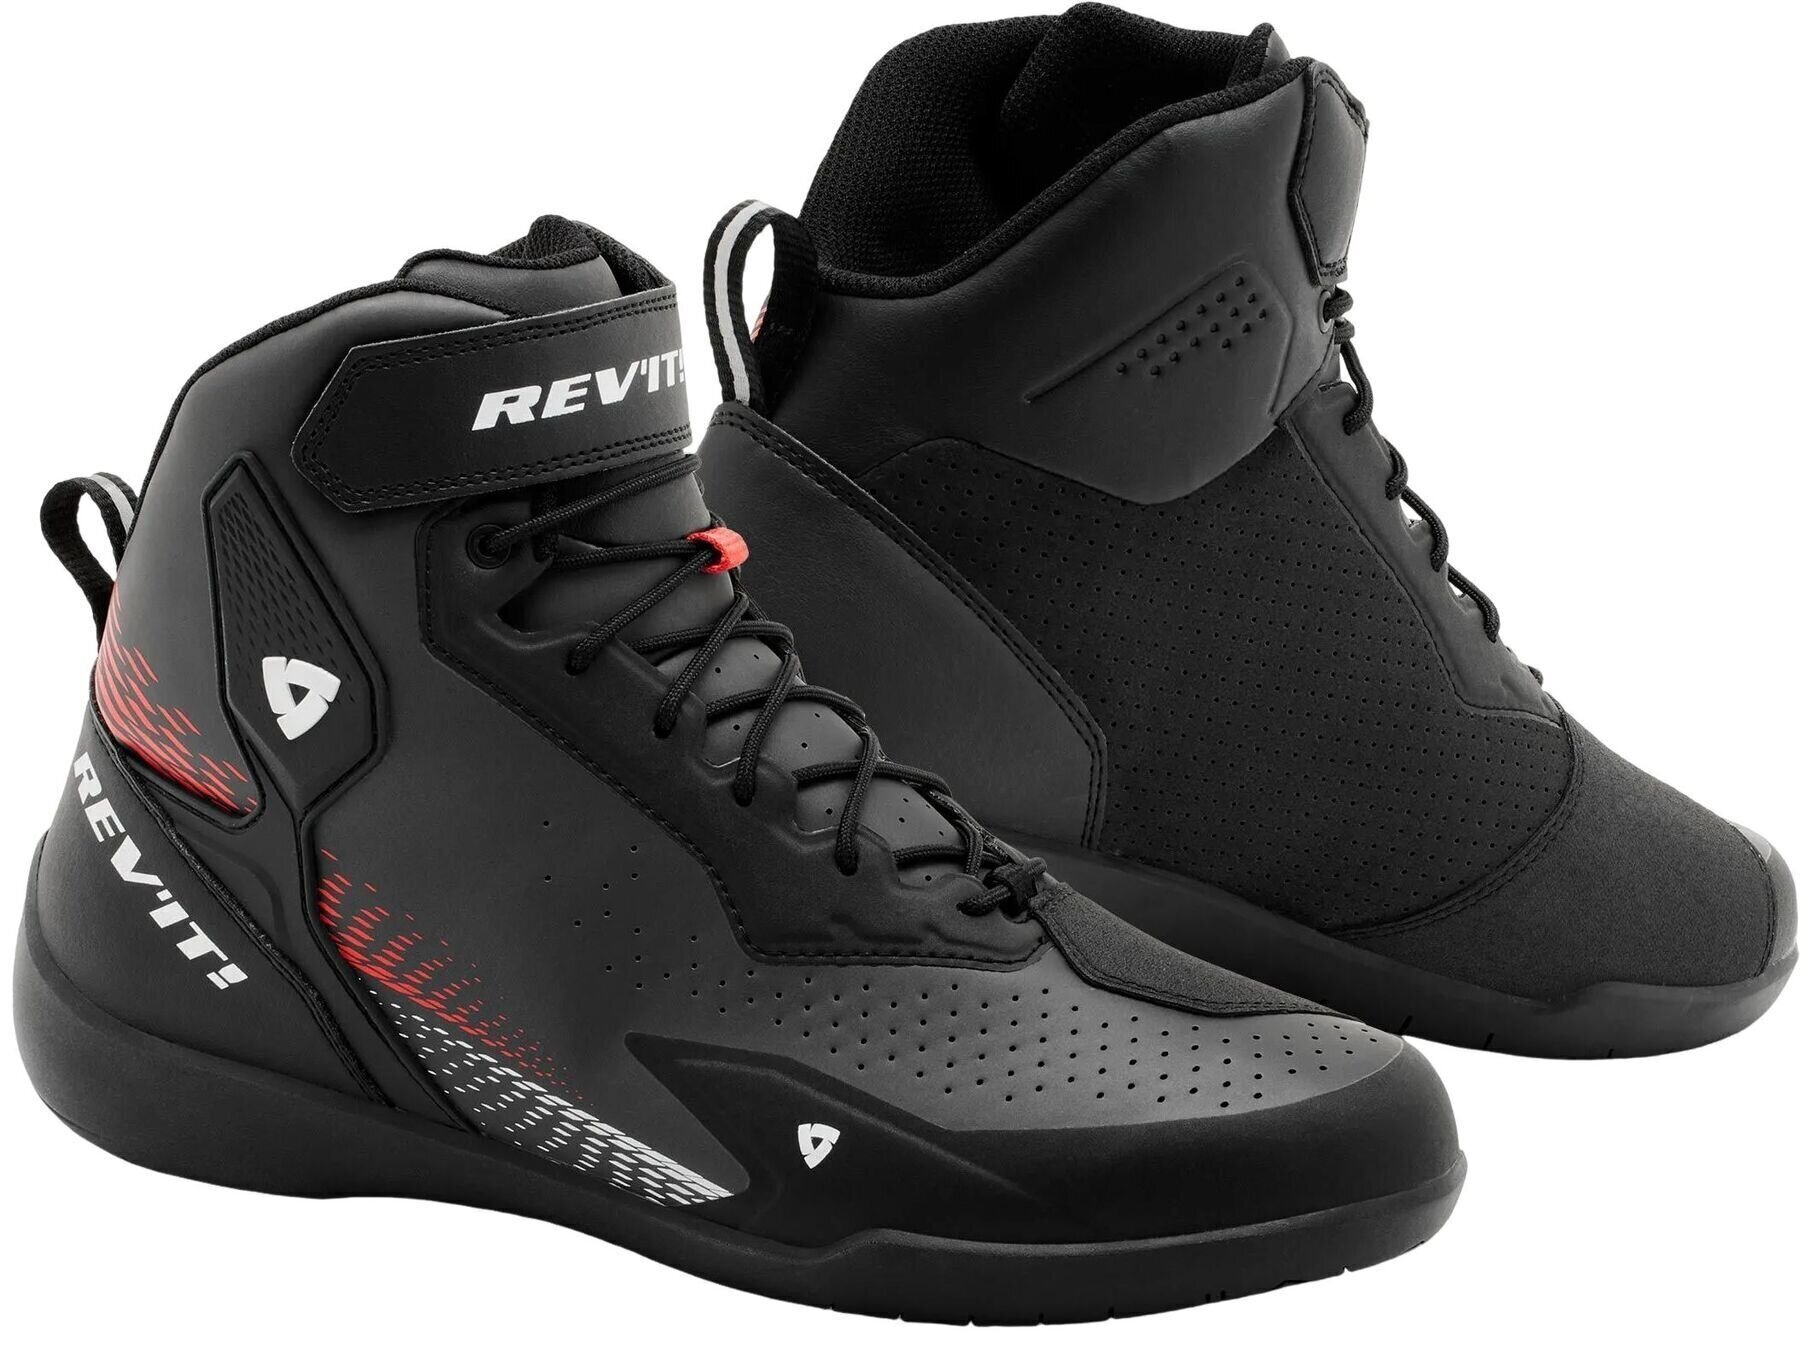 Topánky Rev'it! Shoes G-Force 2 Black/Neon Red 39 Topánky